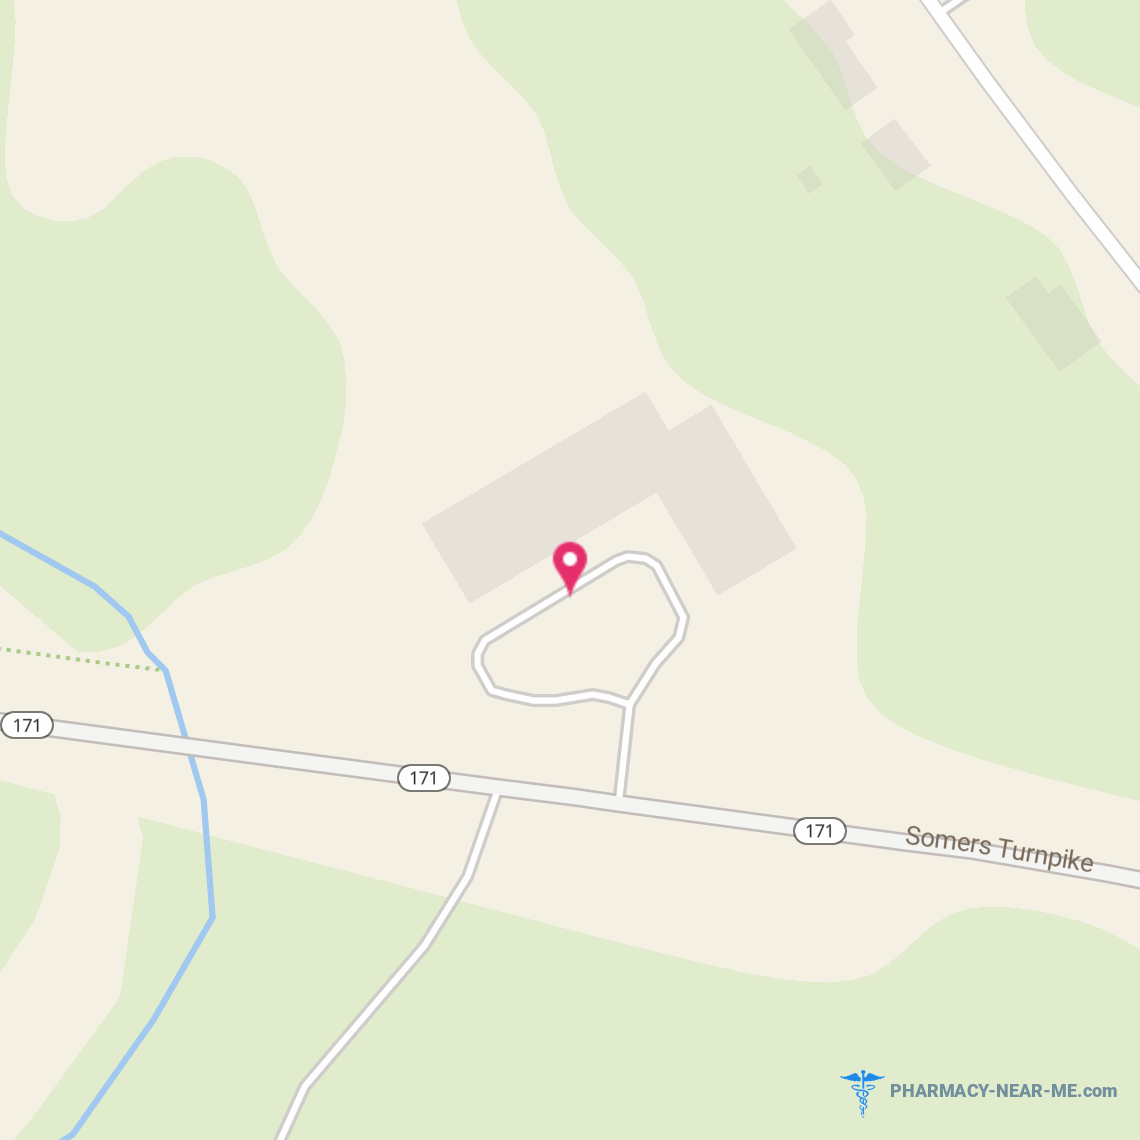 FRANKLIN PHARMACY AND HOME HEALTH CARE, INC. - Pharmacy Hours, Phone, Reviews & Information: 35 Somers Turnpike, Woodstock, Connecticut 06281, United States